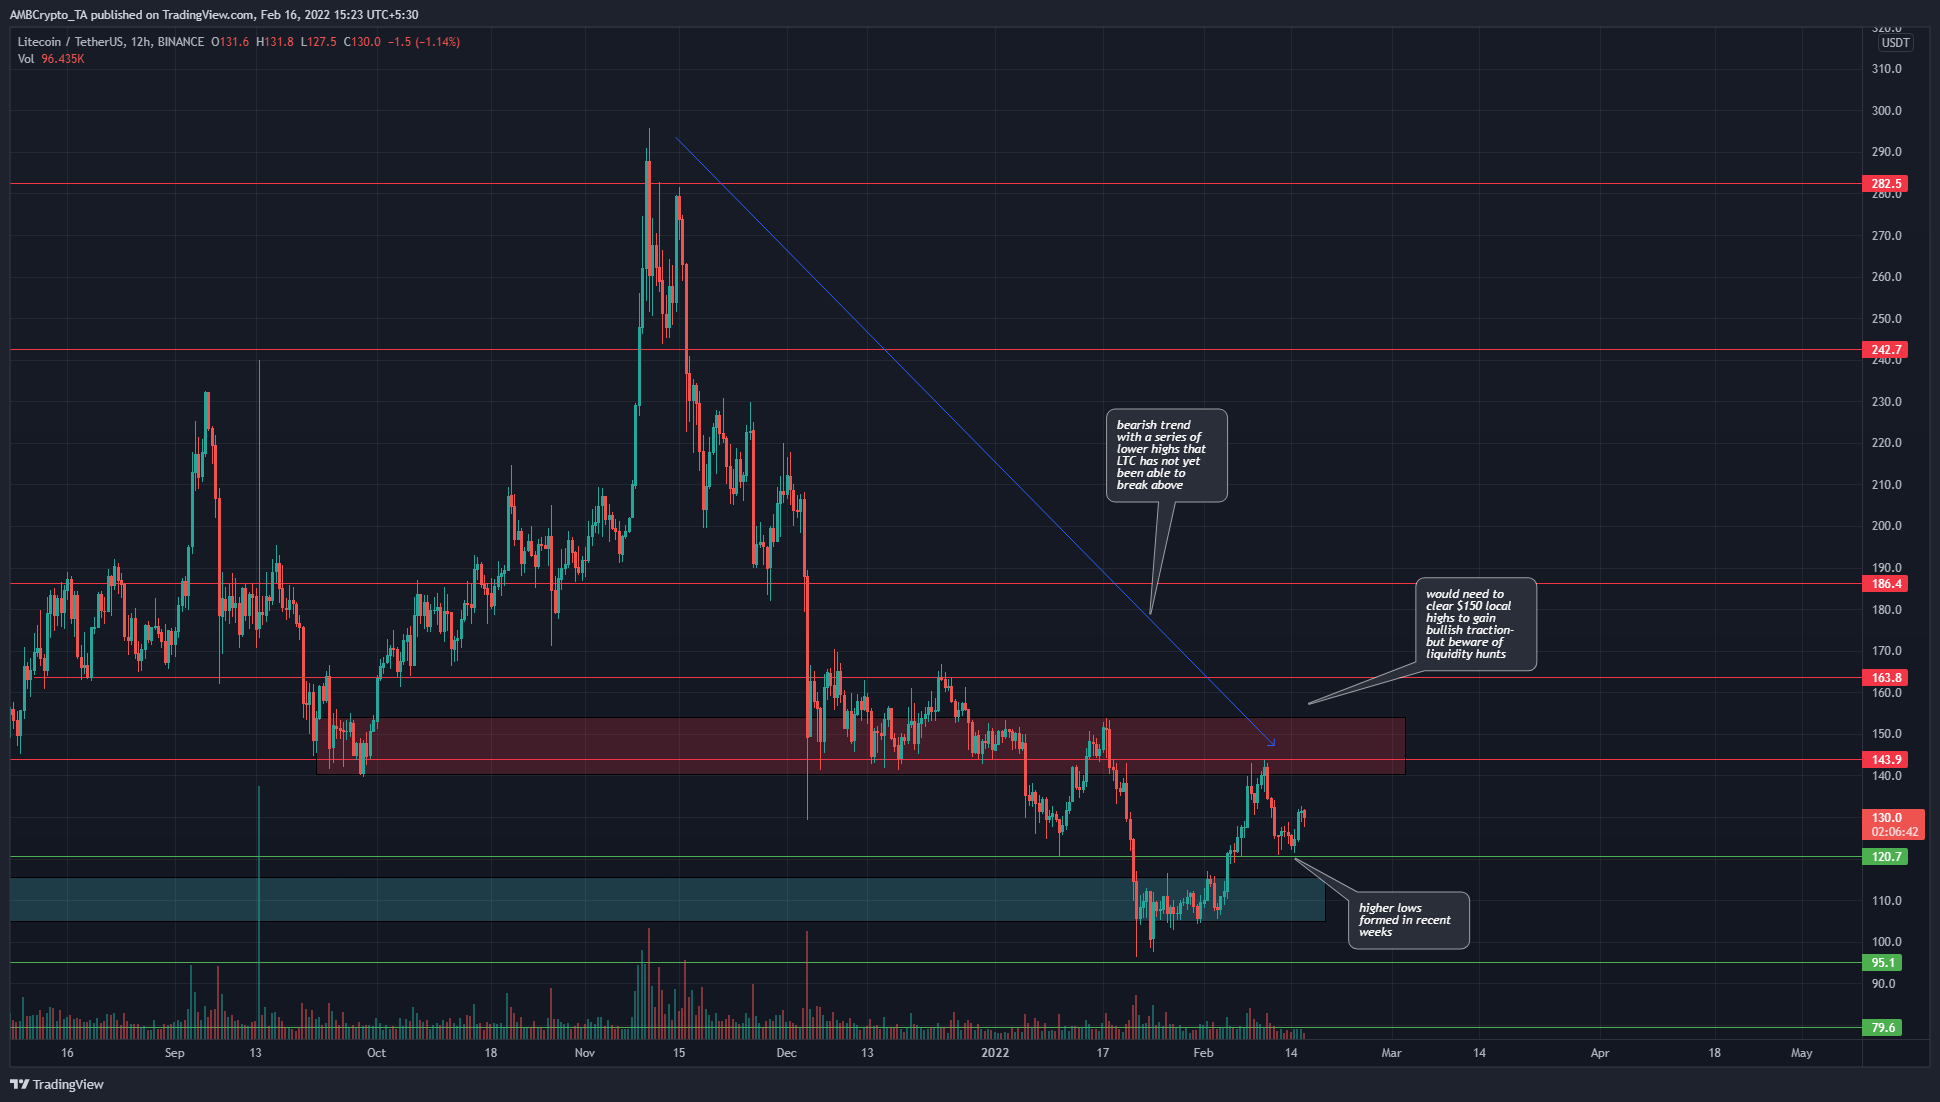 Litecoin found support at $120 but a move upward would be for selling